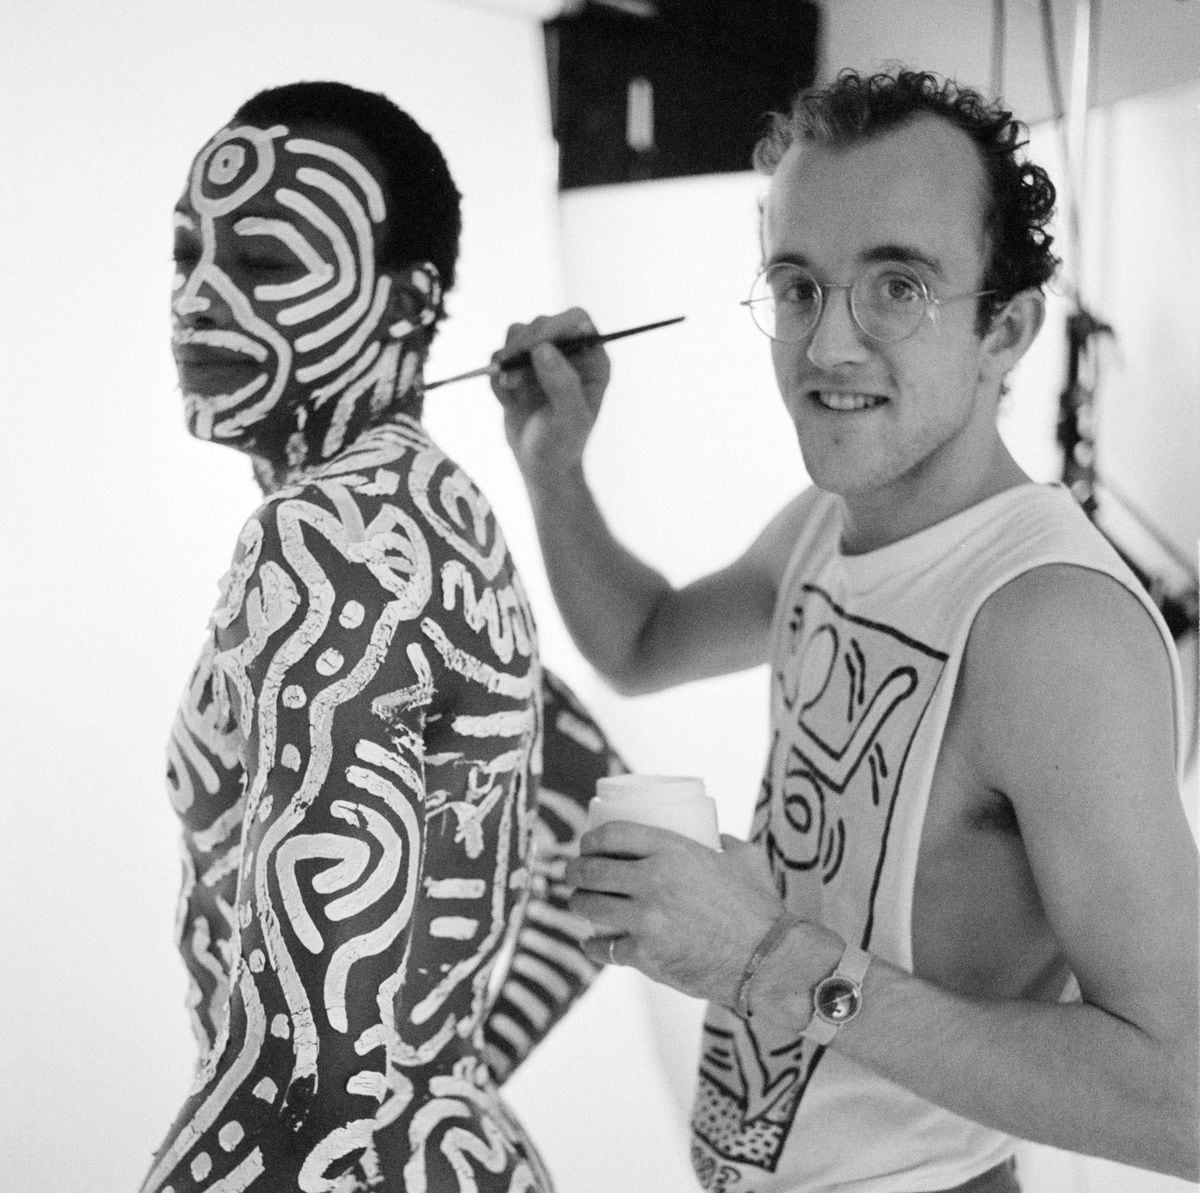 The Keith Haring renaissance: Almost four decades later, the iconic artist finds a new generation of fans